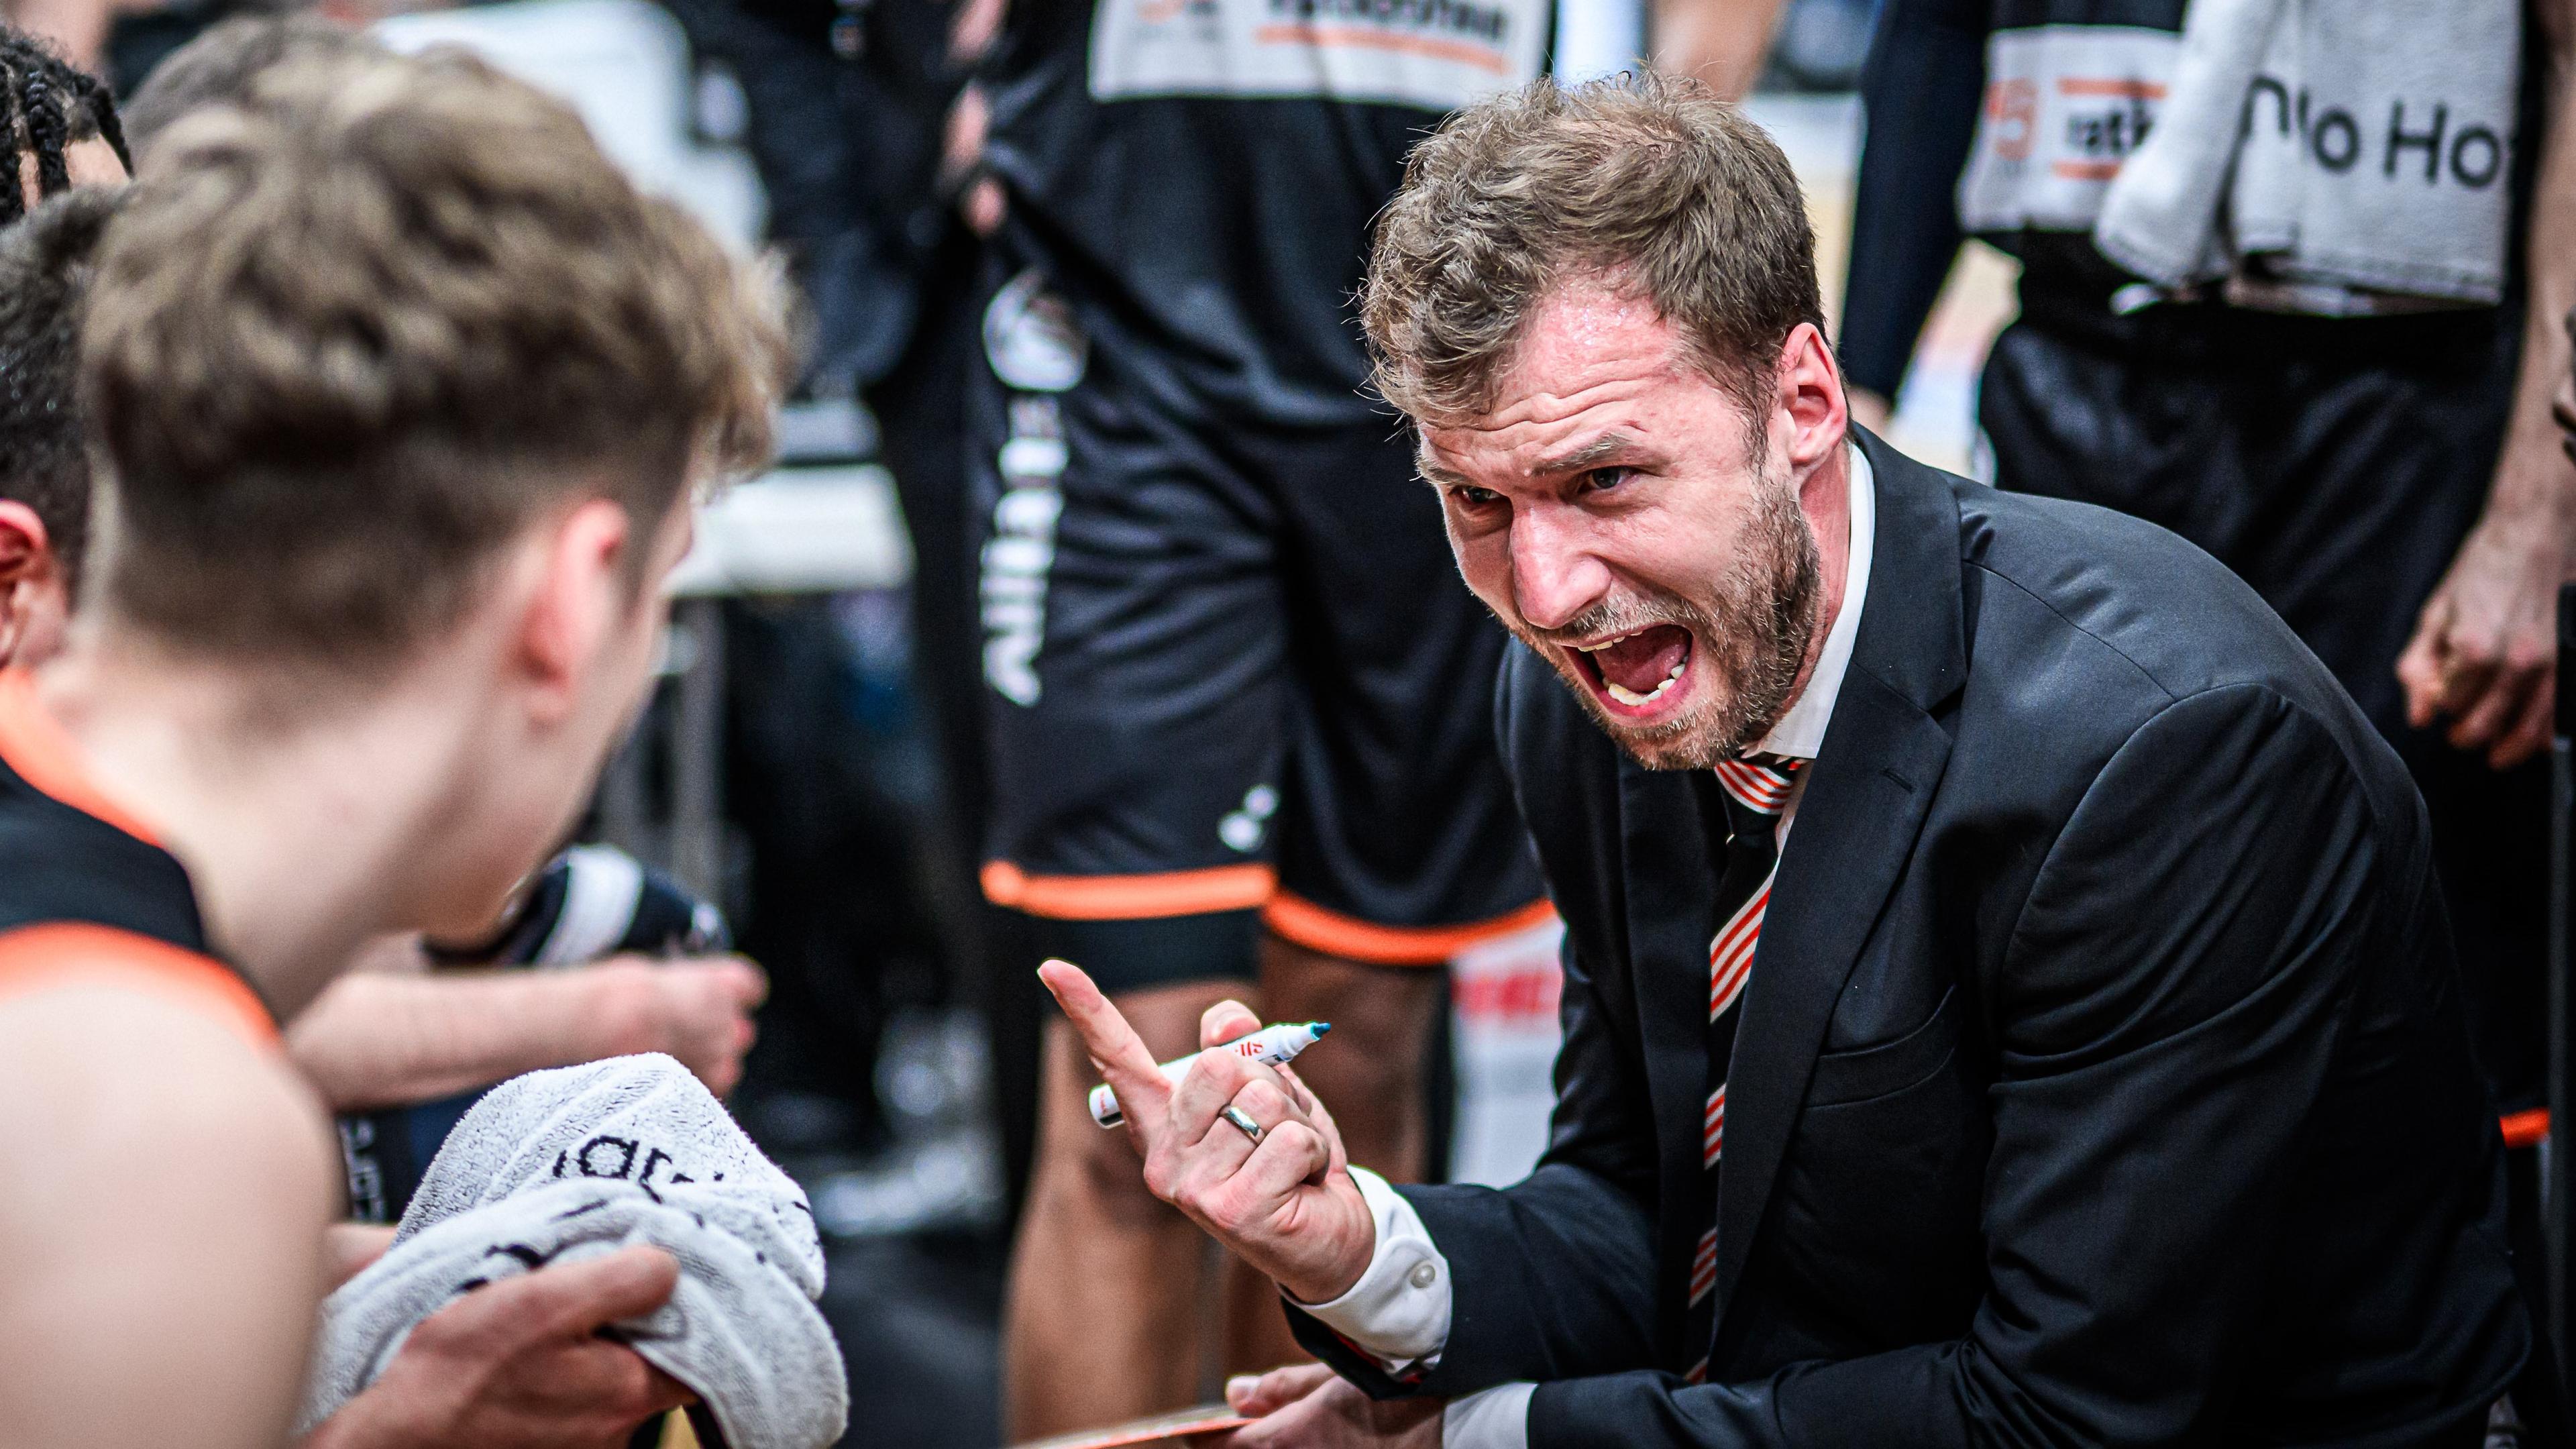 The week was dominated by off-court news as Anton Gavel will return to Bamberg Baskets next season while Ty Harrelson will leave RASTA Vechta to replace him at ratiopharm ulm. Vechta meanwhile signed Martin Schiller as new coach, and Würzburg Baskets extended their deal with head coach Sasa Filipovski. And MHP RIESEN Ludwigsburg brought back star talent Ariel Hukporti. On the court, MLP Academics Heidelberg left the relegation zone with a home victory.